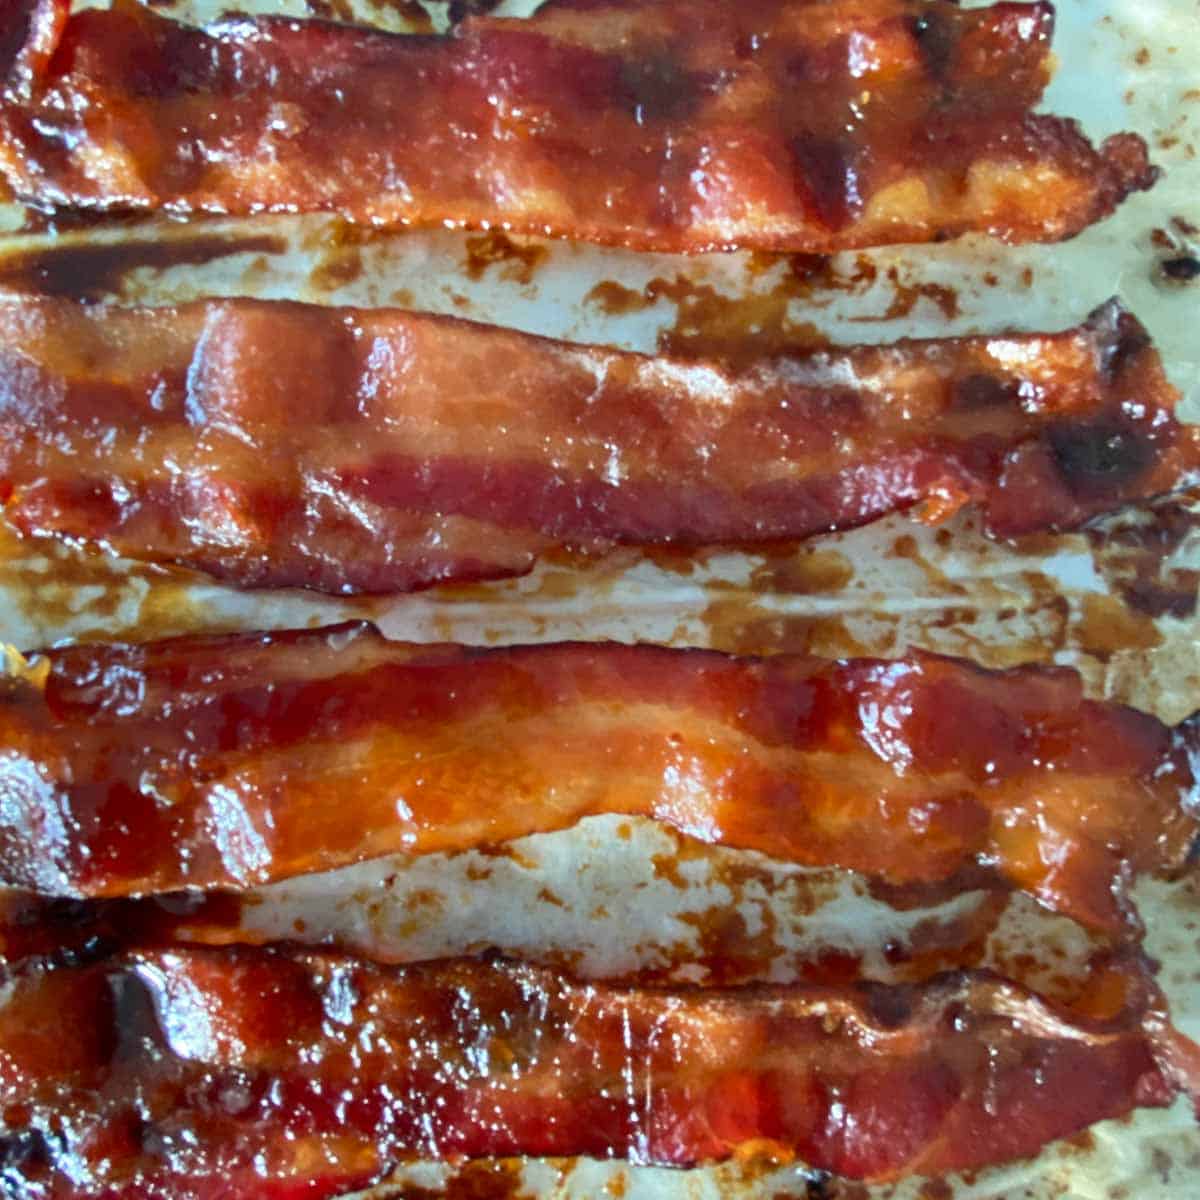 4 pieces of cooked maple candied bacon on a baking sheet.